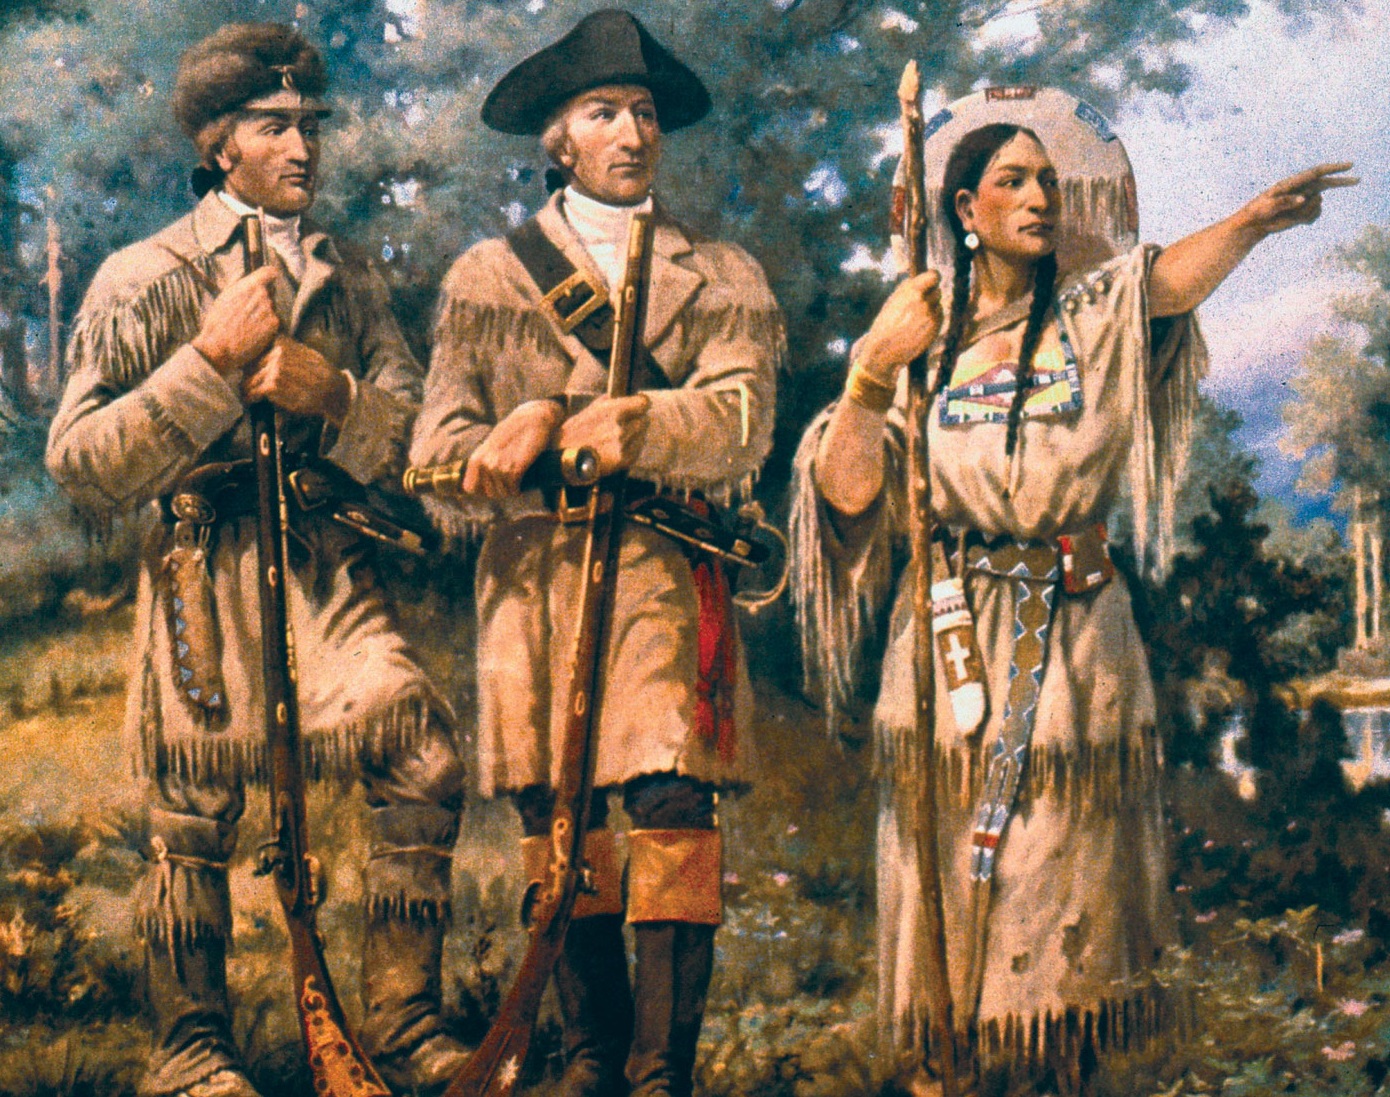 <p>Led by Meriwether Lewis and William Clark, the team ventured deep into the unknown of America, navigating rivers, crossing mountains, and finally reaching the Pacific Coast. Their journey documented a wealth of new plants and animals, recorded interactions with Native American tribes, and mapped vast stretches of unexplored land. This valuable information provided crucial insights into the geography and resources of the American West.</p>